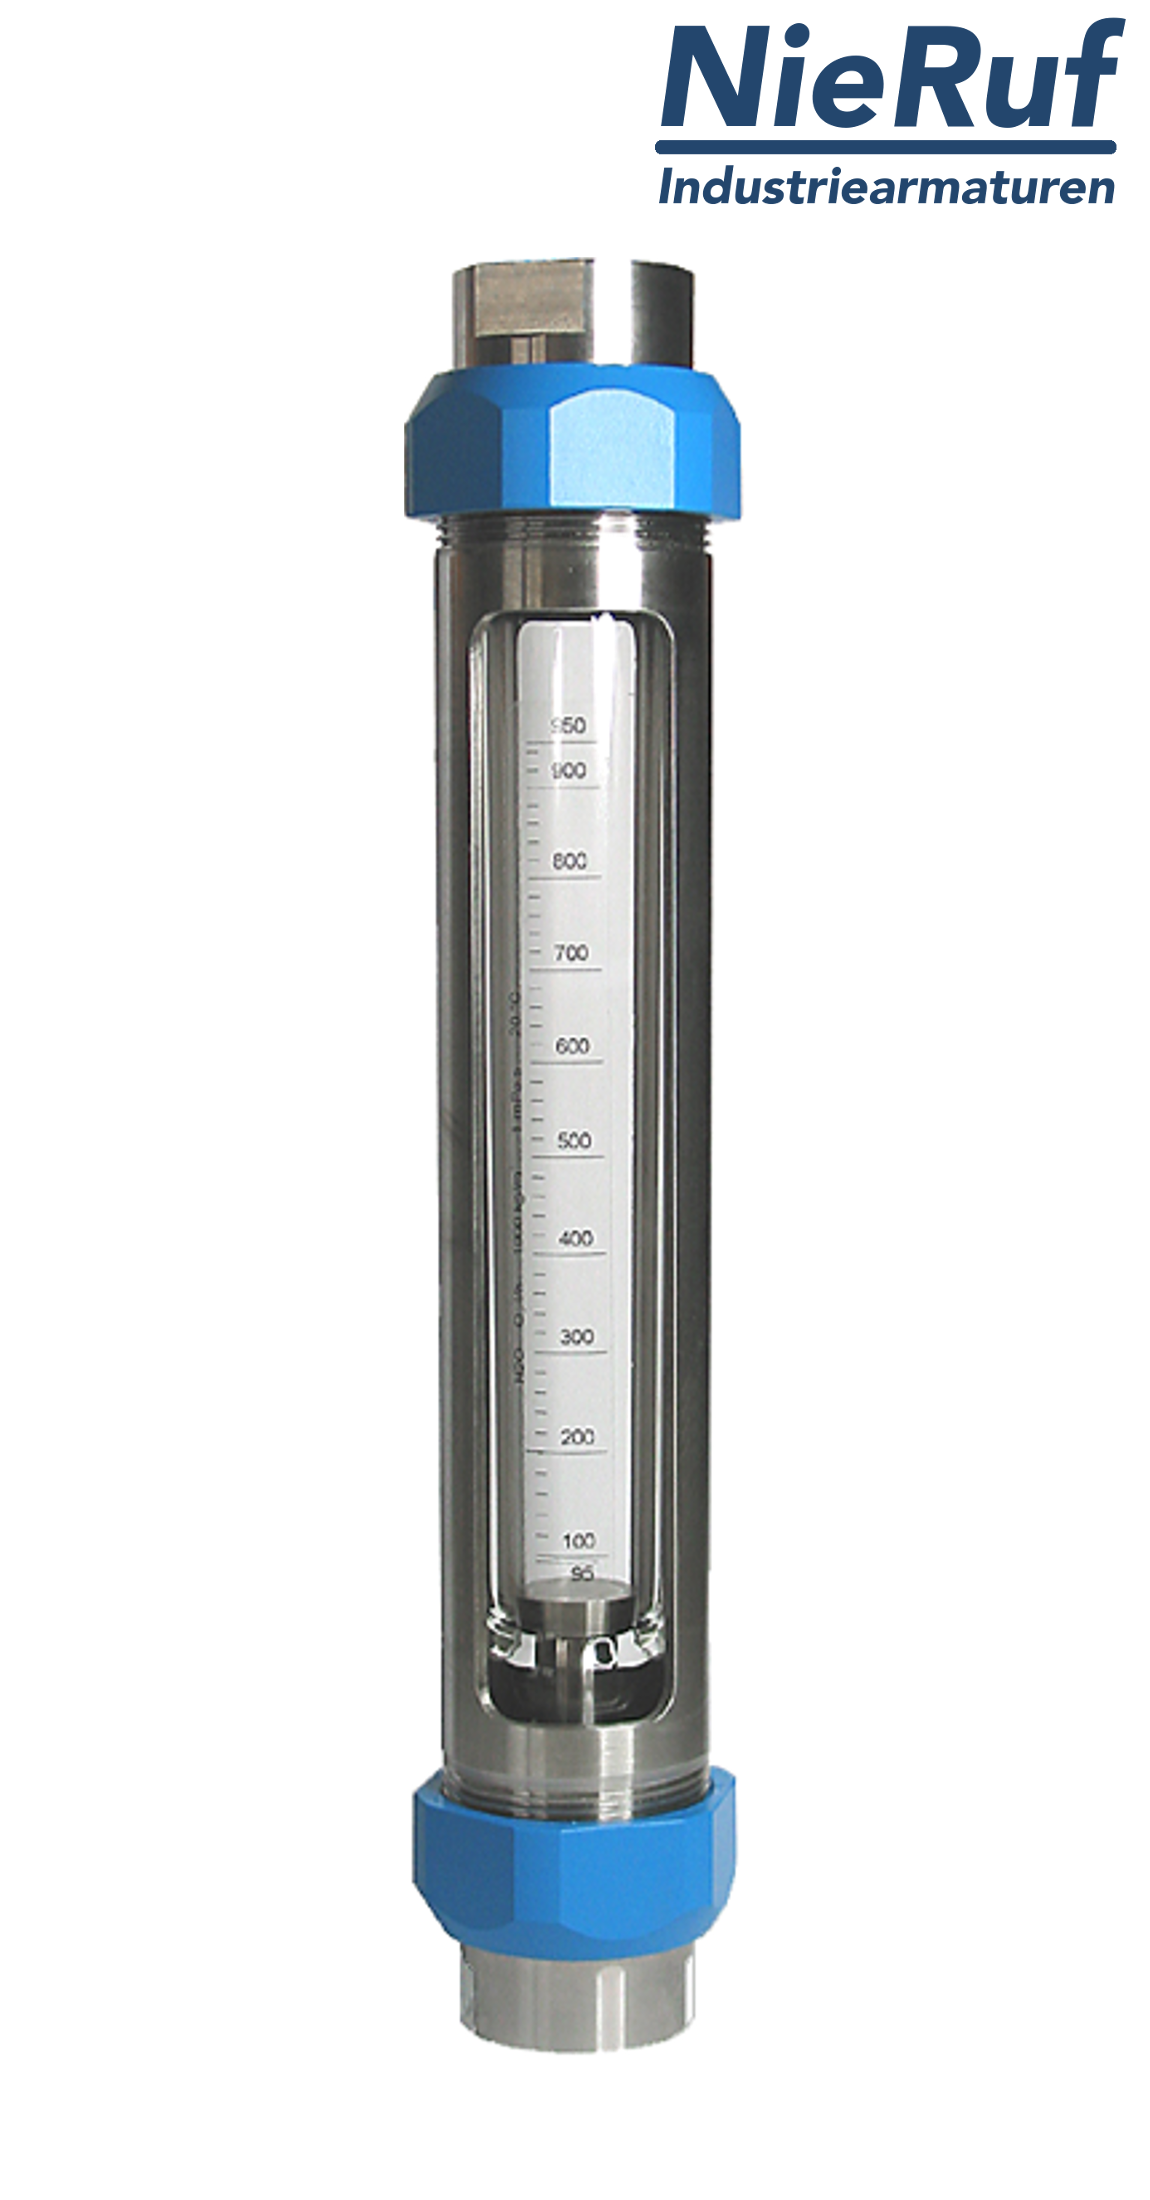 Variable area flowmeter stainless steel + borosilicate 1/2" inch 3.0 - 30.0 l/h water FKM